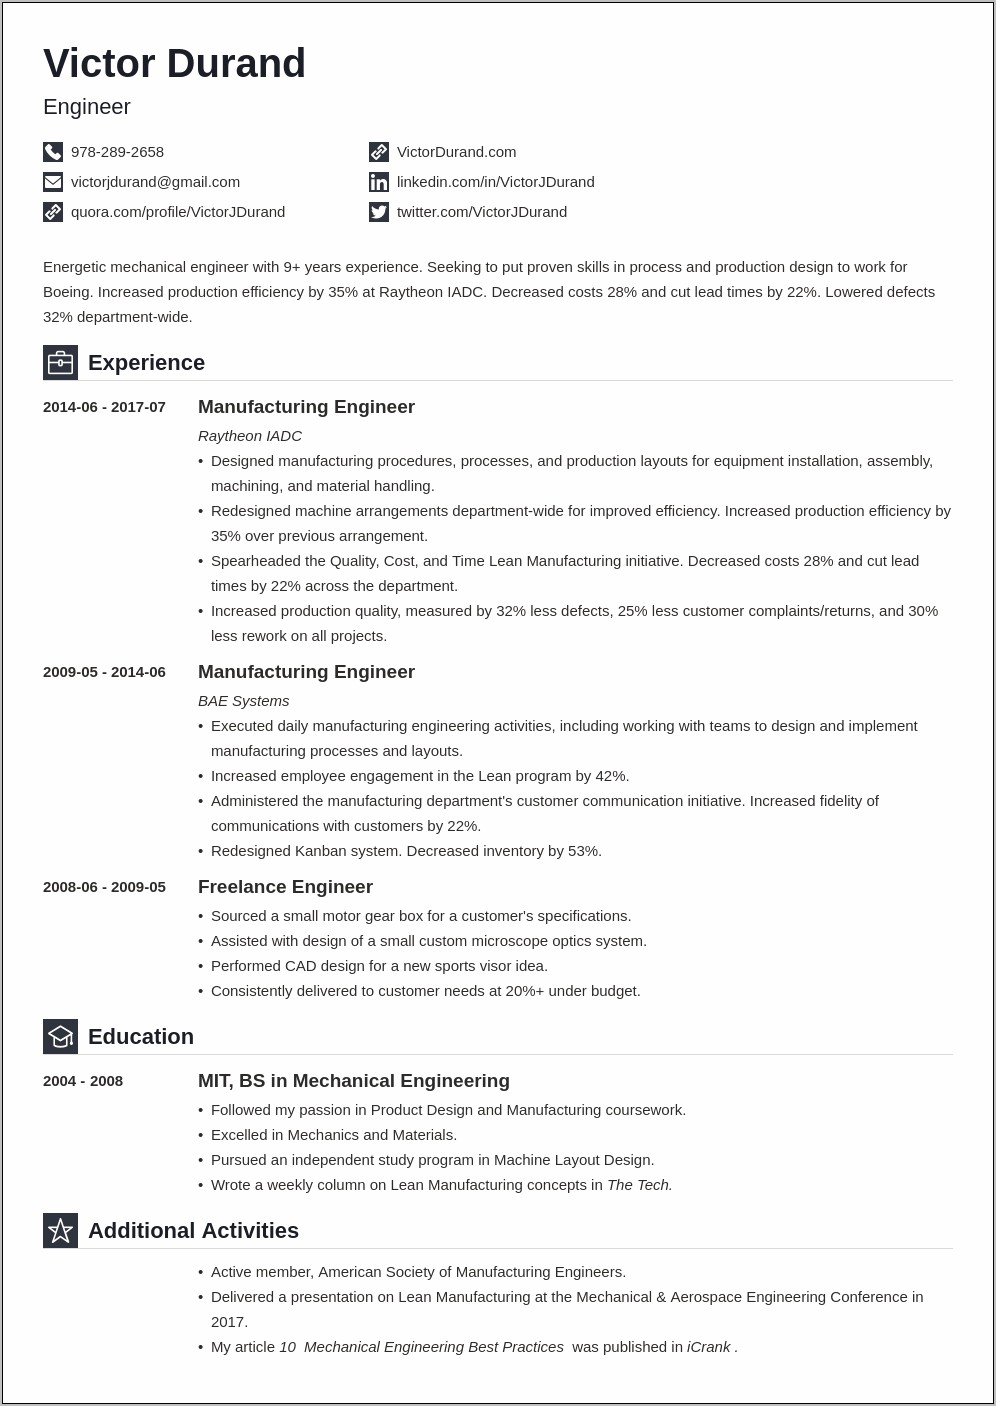 Are Objectives Good On Resumes Reddit